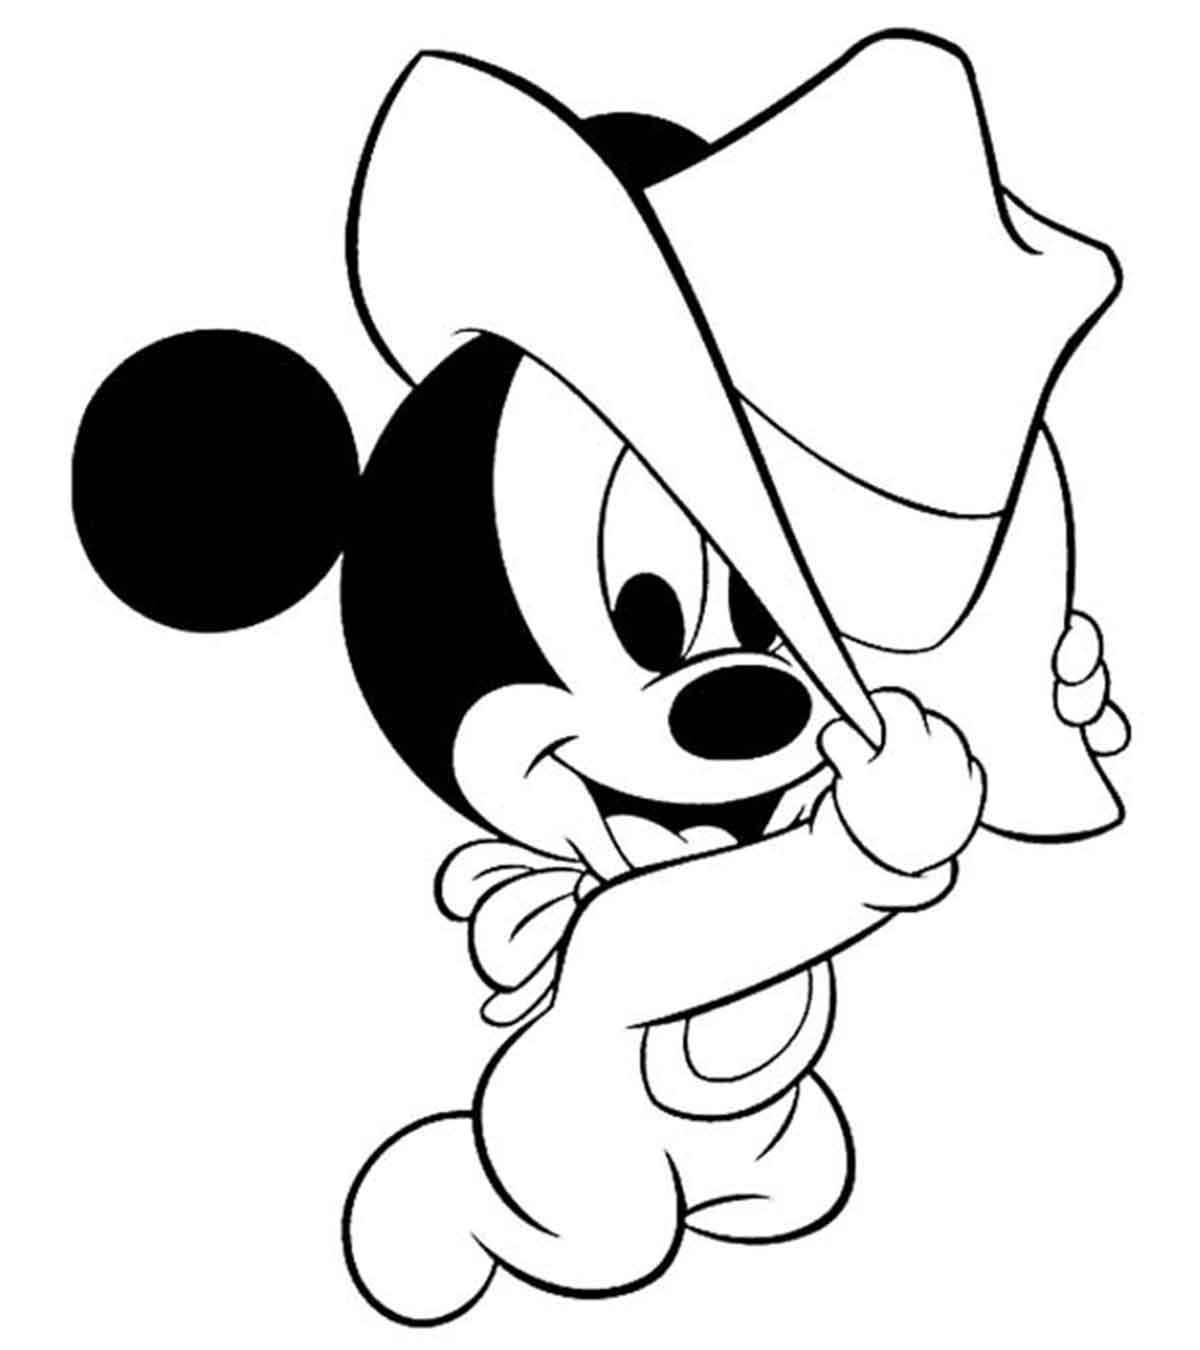 Hard Hat Coloring Page Top 75 Free Printable Mickey Mouse Coloring Pages Online